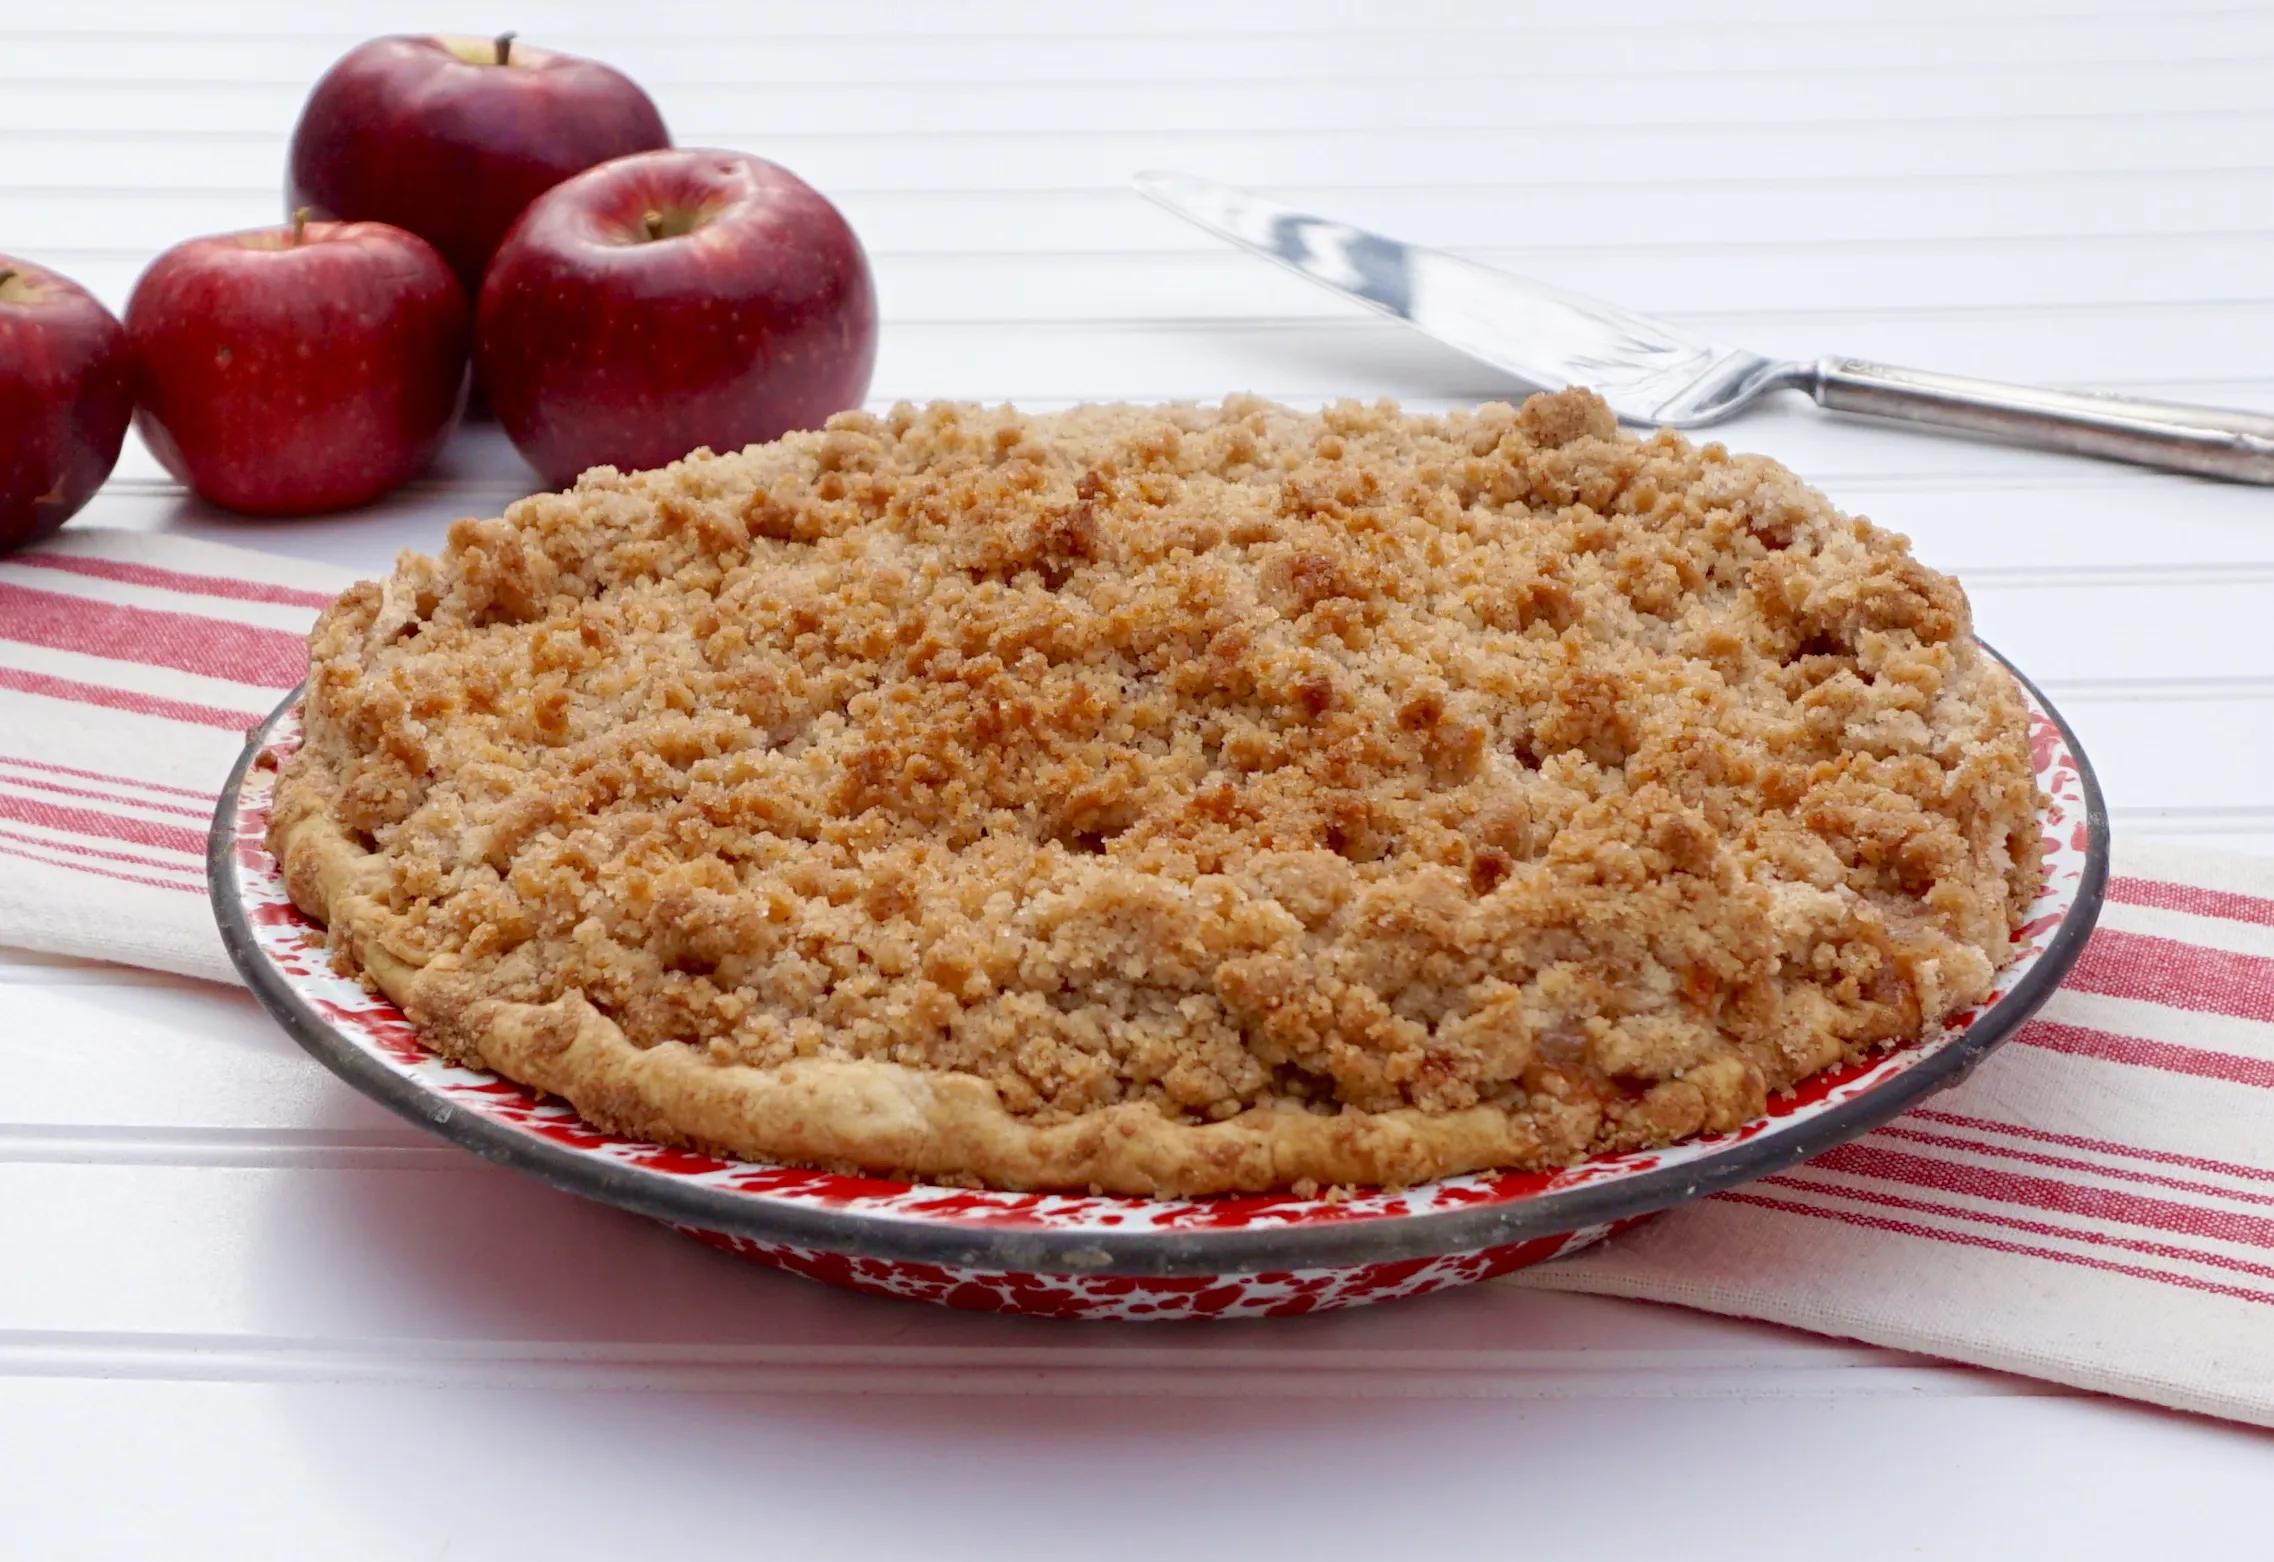 Apple Crumble Pie has a buttery crumb topping with cinnamon